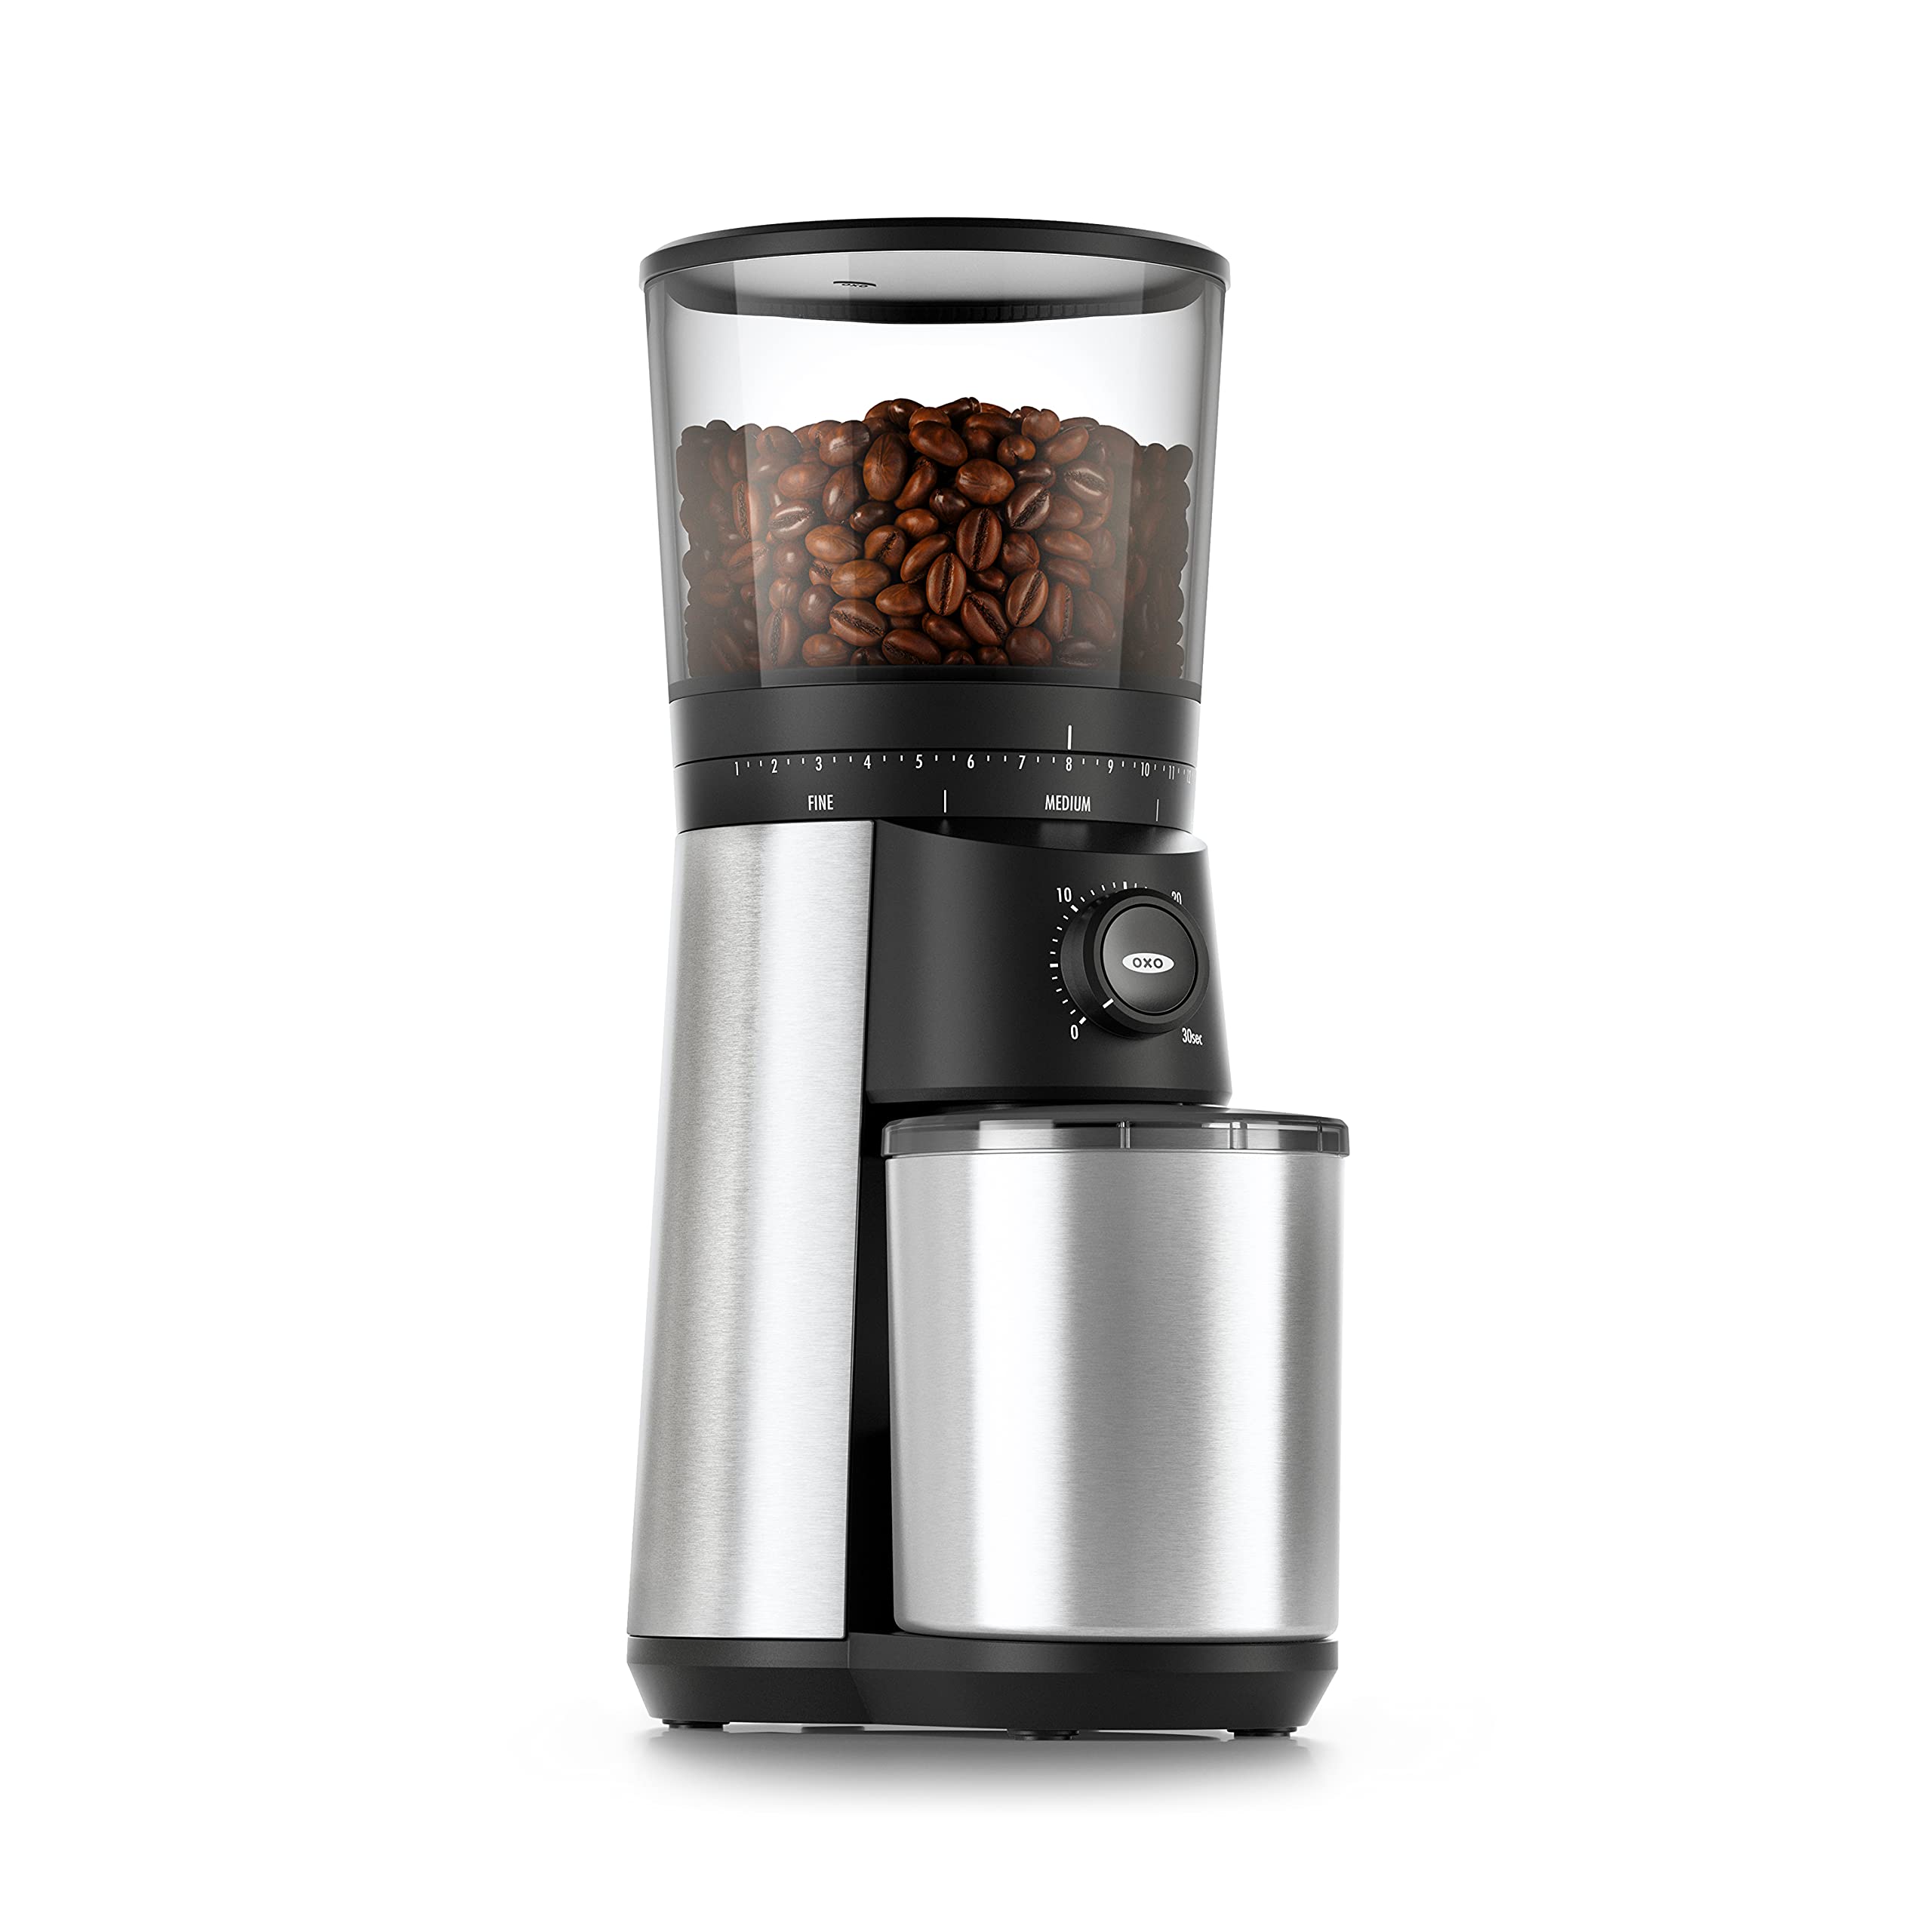 OXO Brew Conical Burr Coffee Grinder , Silver $79.99